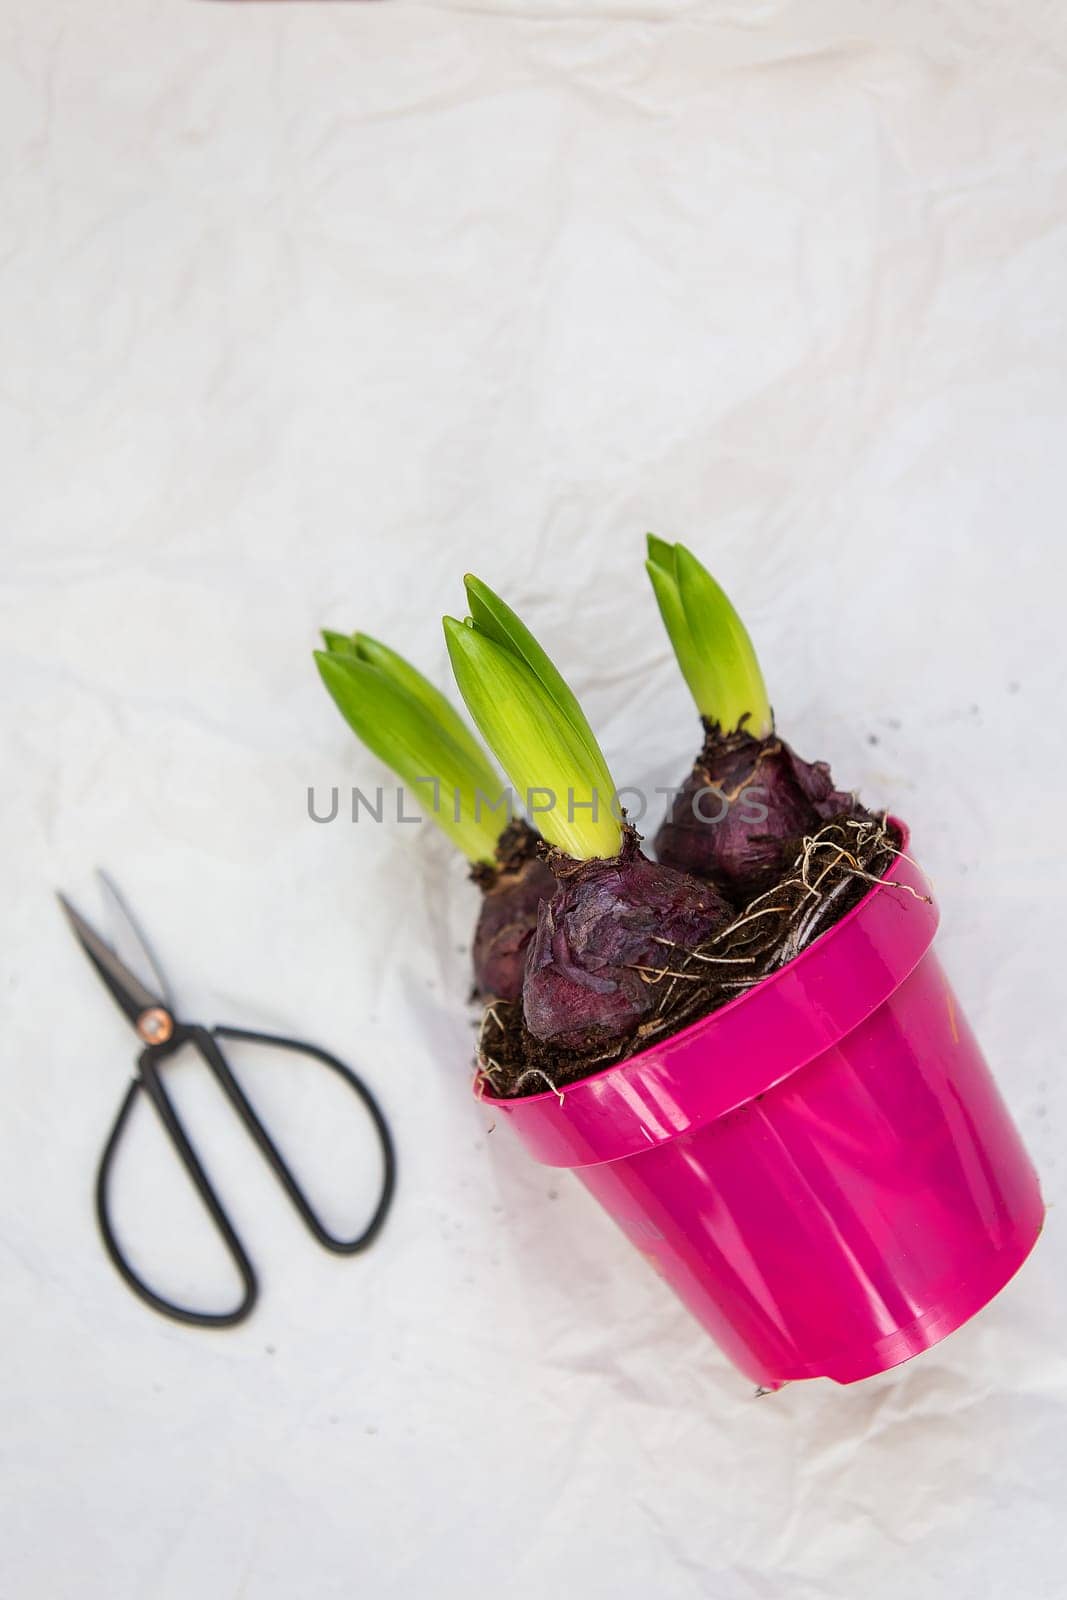 Hyacinth flower in a pink pot together with scissors on a white background. Gardening in the spring, planting hyacinth